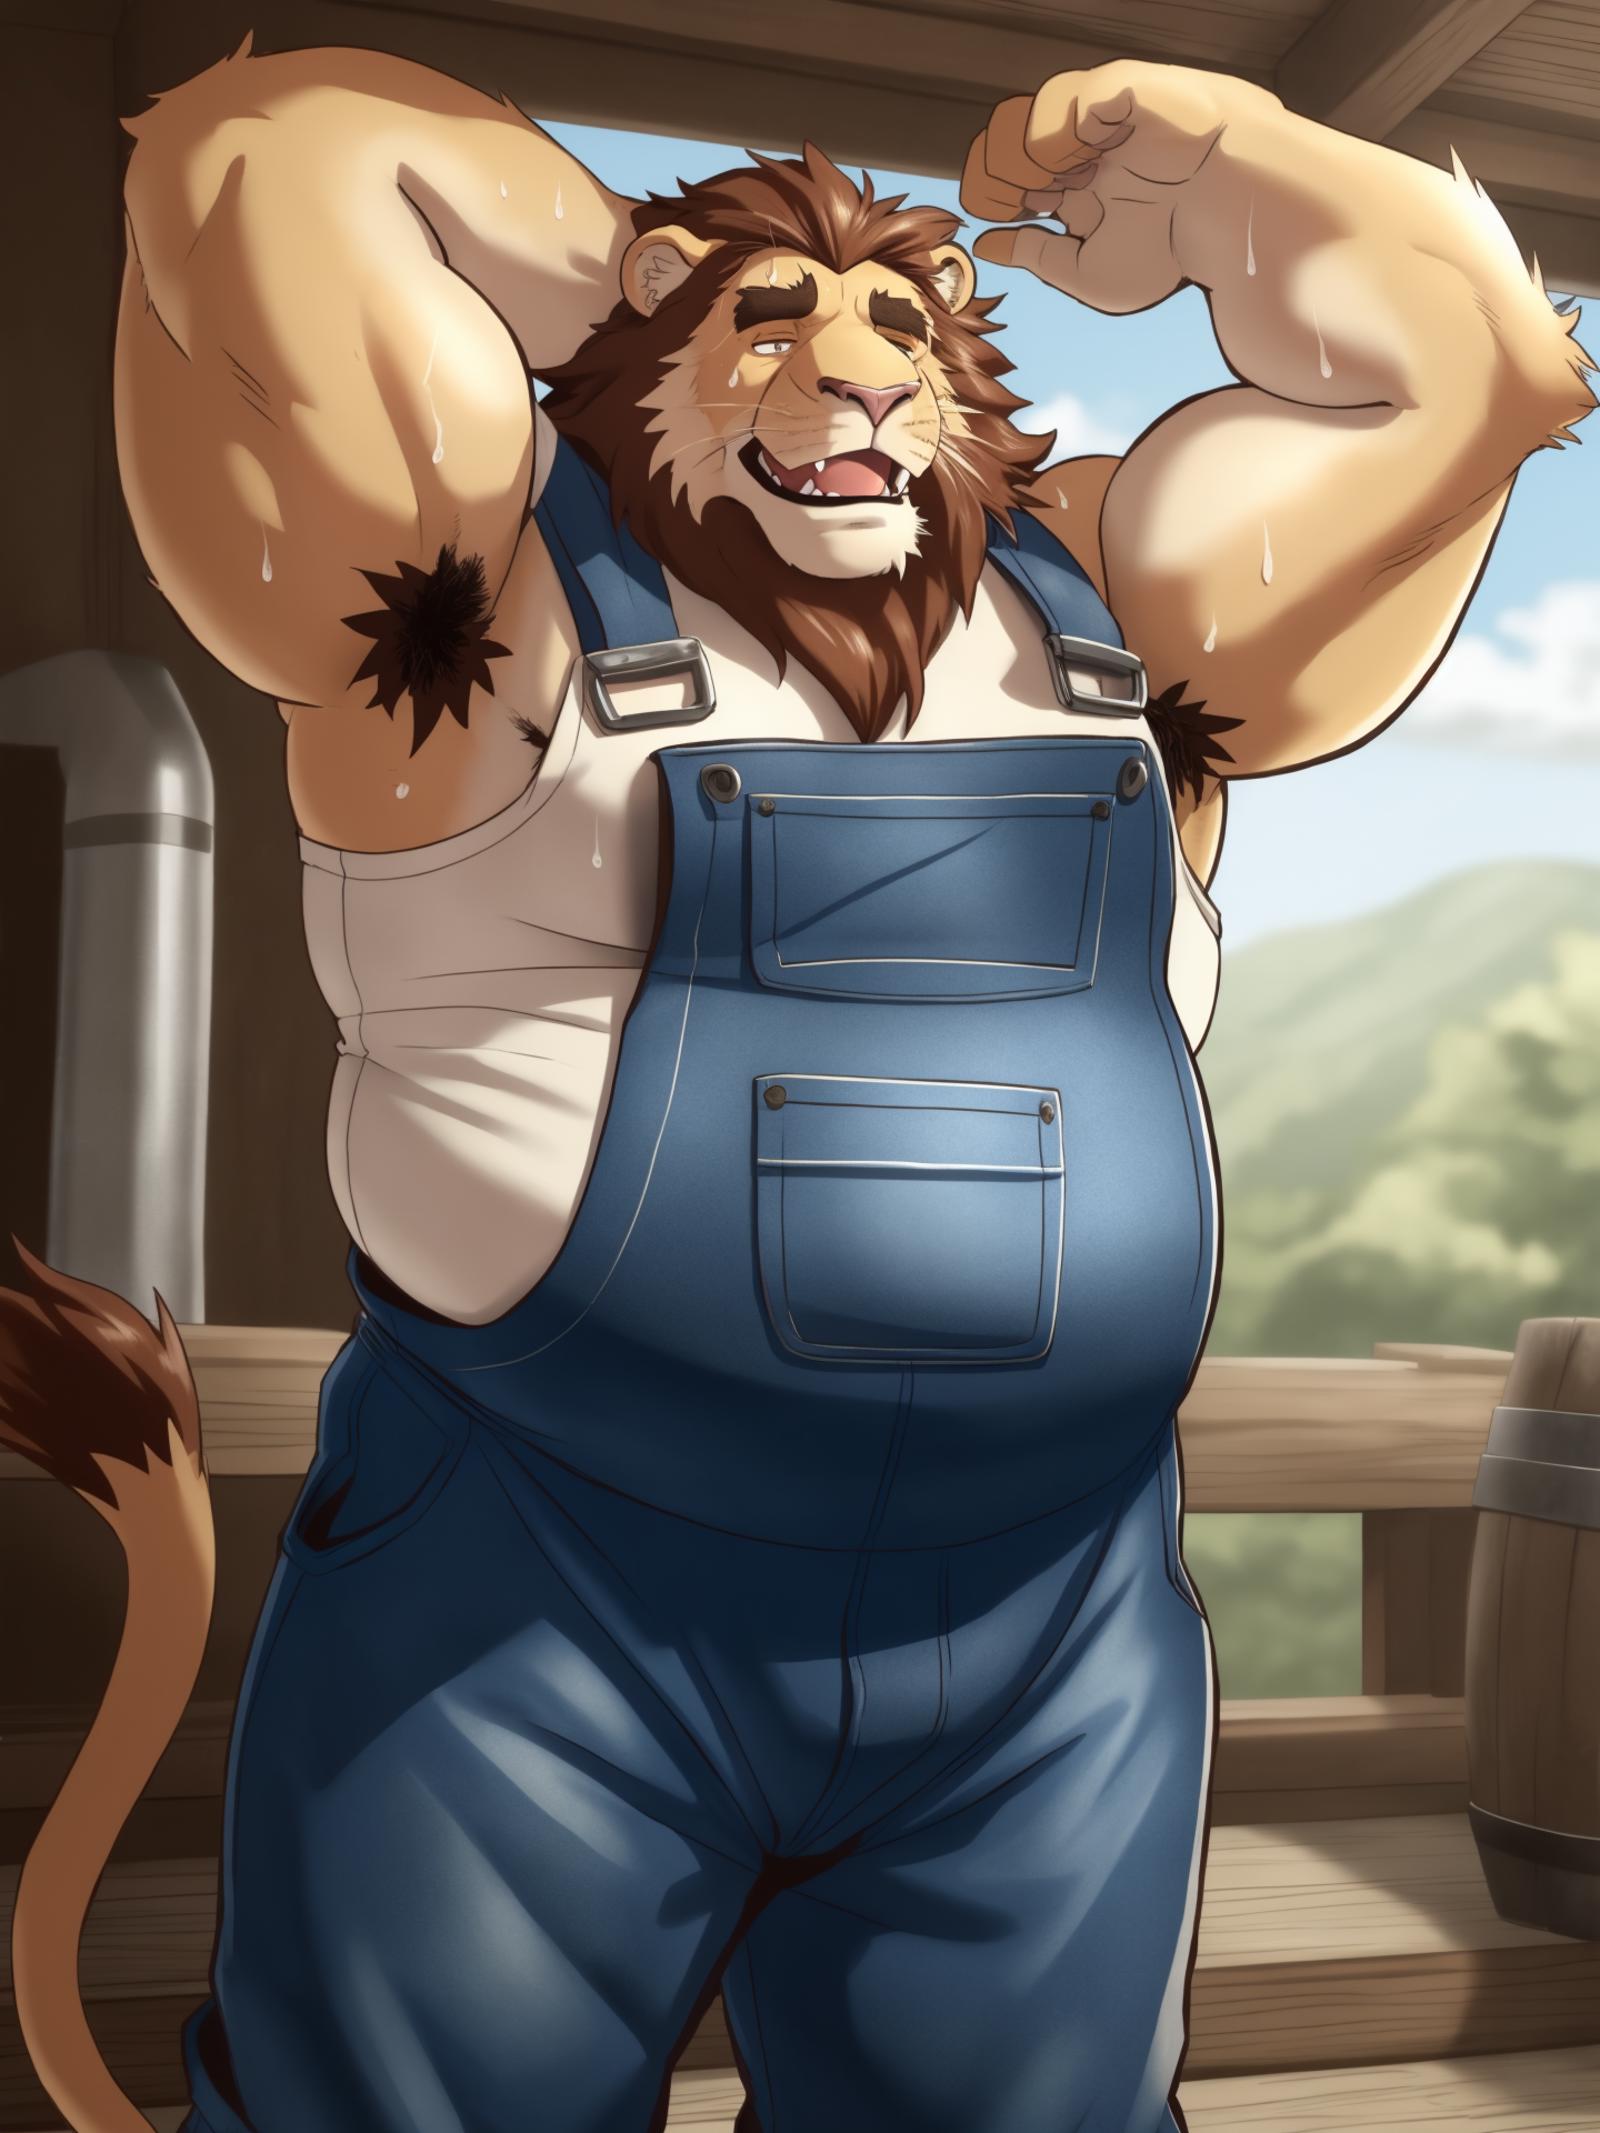 bontiage style (furry bara) image by paperplain